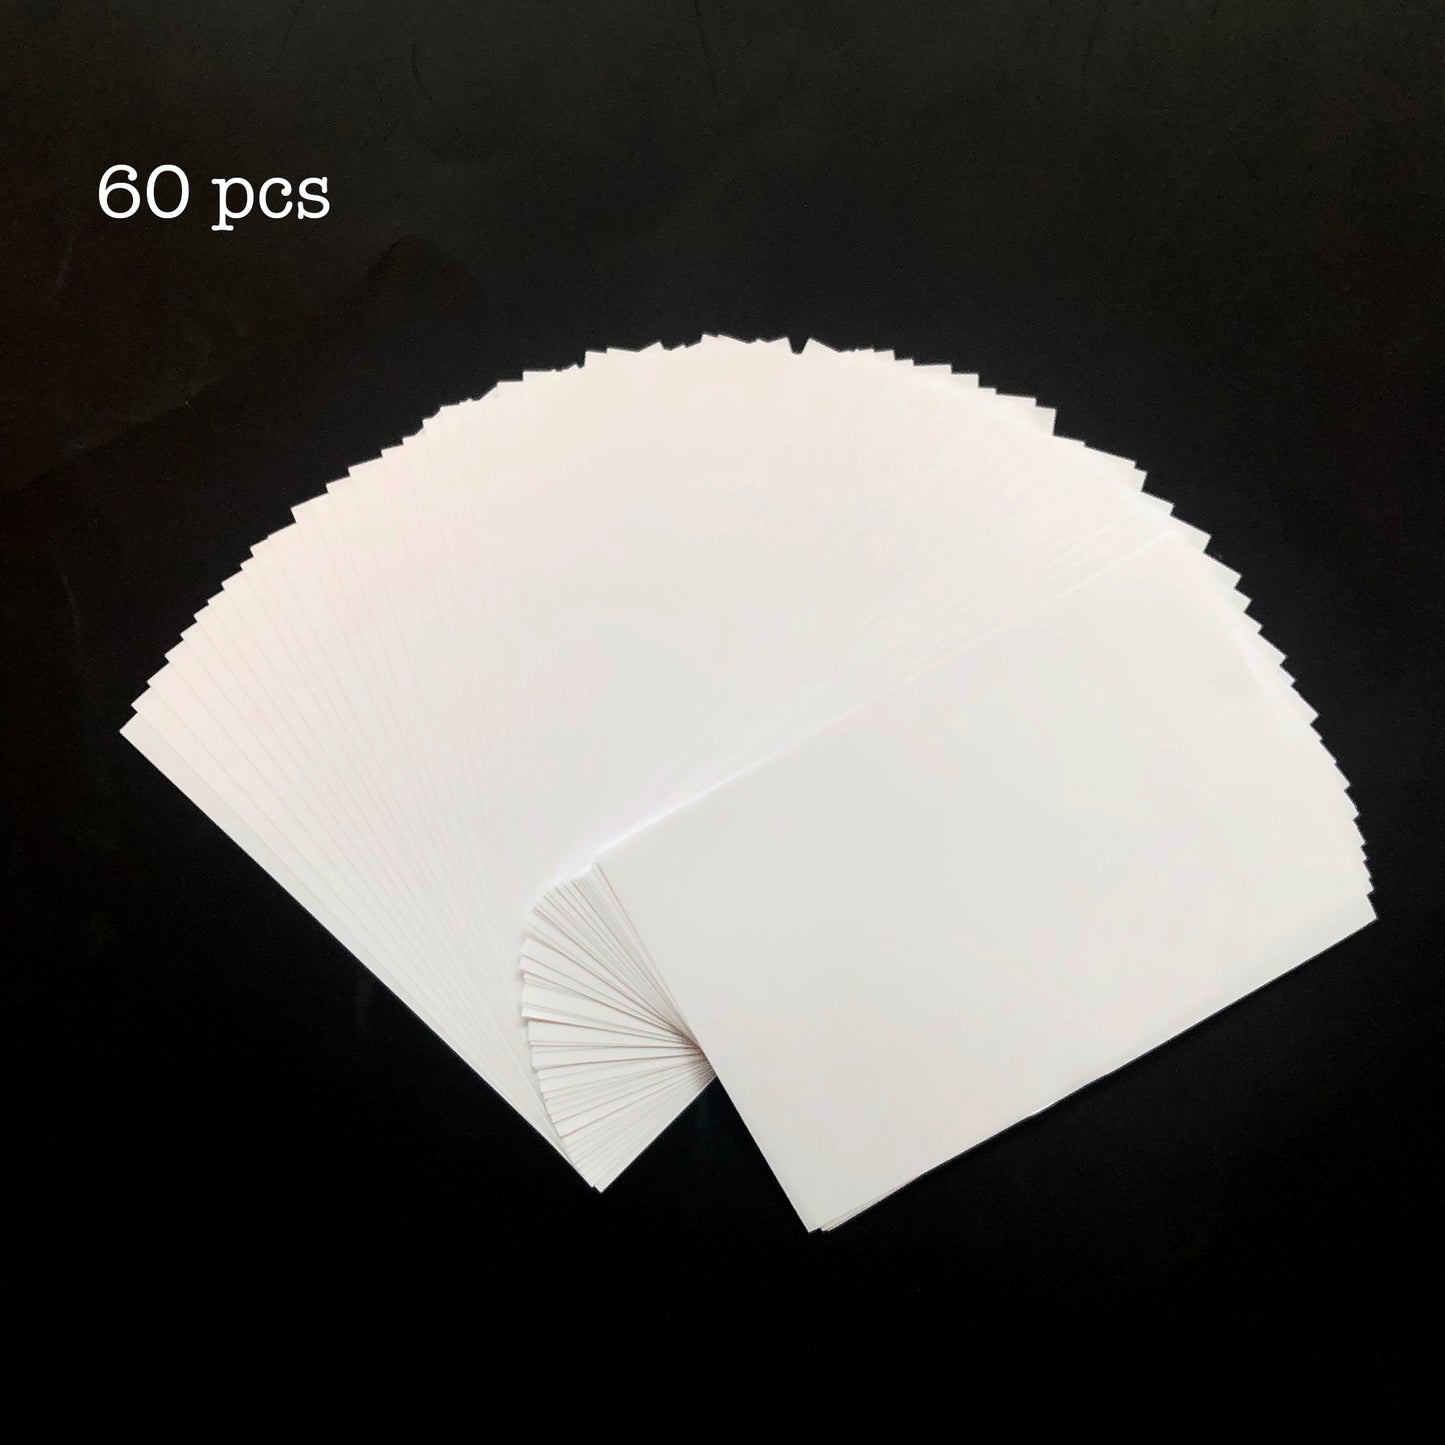 Staroar diamond painting 60 pcs Pack of Release Paper/Cover paper